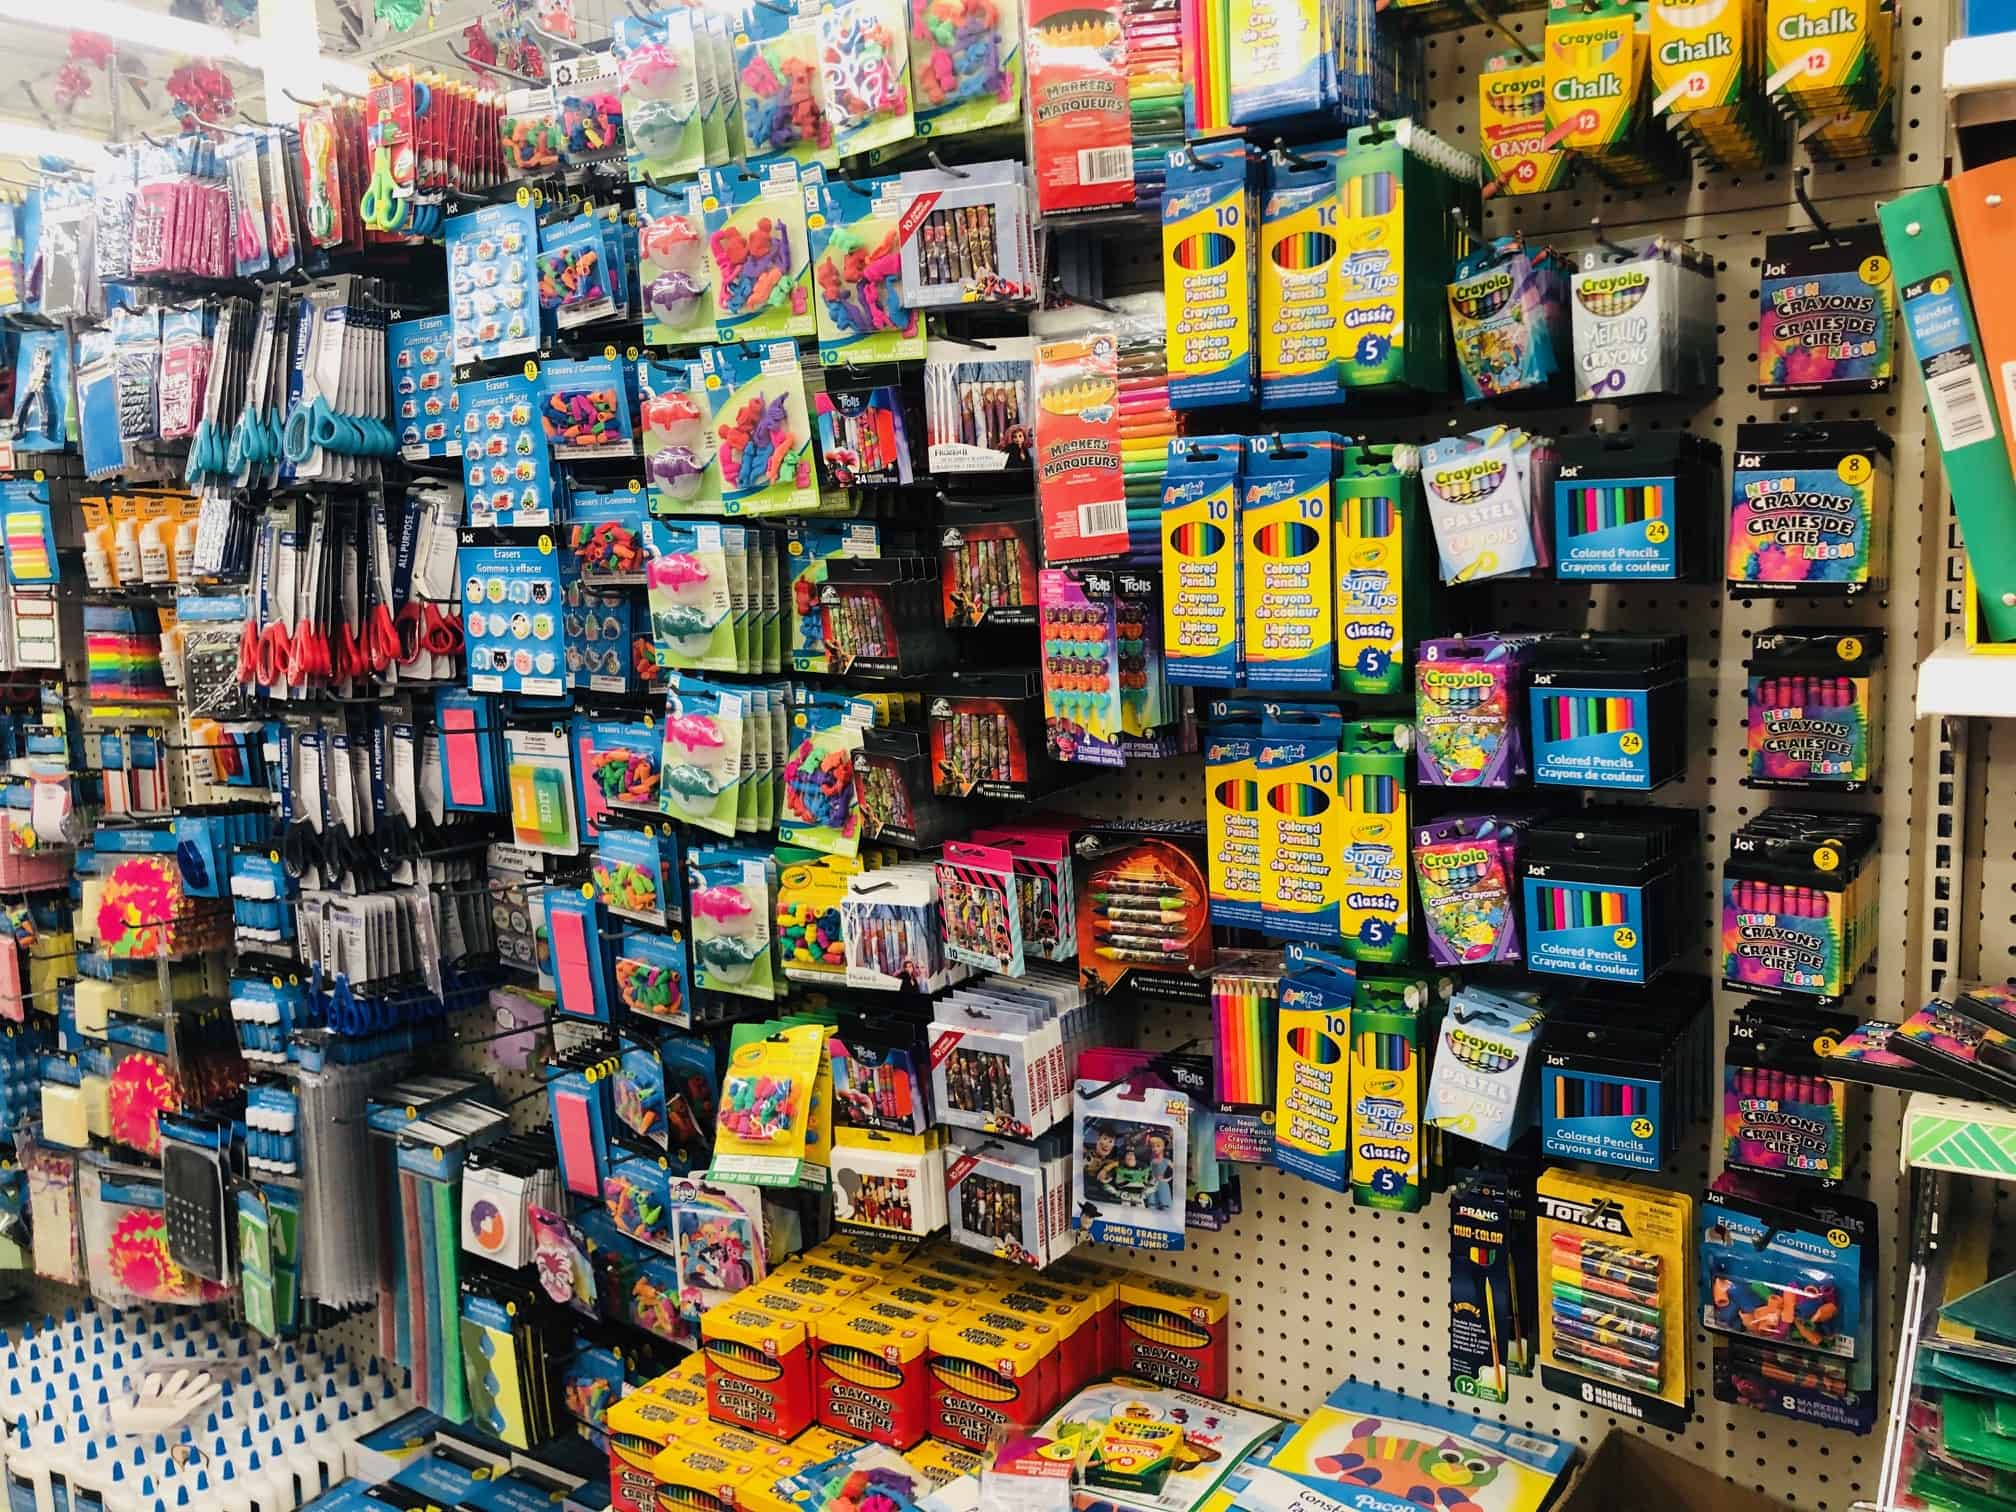 50+ Best Things To Buy at Dollar Tree Ultimate List that Can Save You